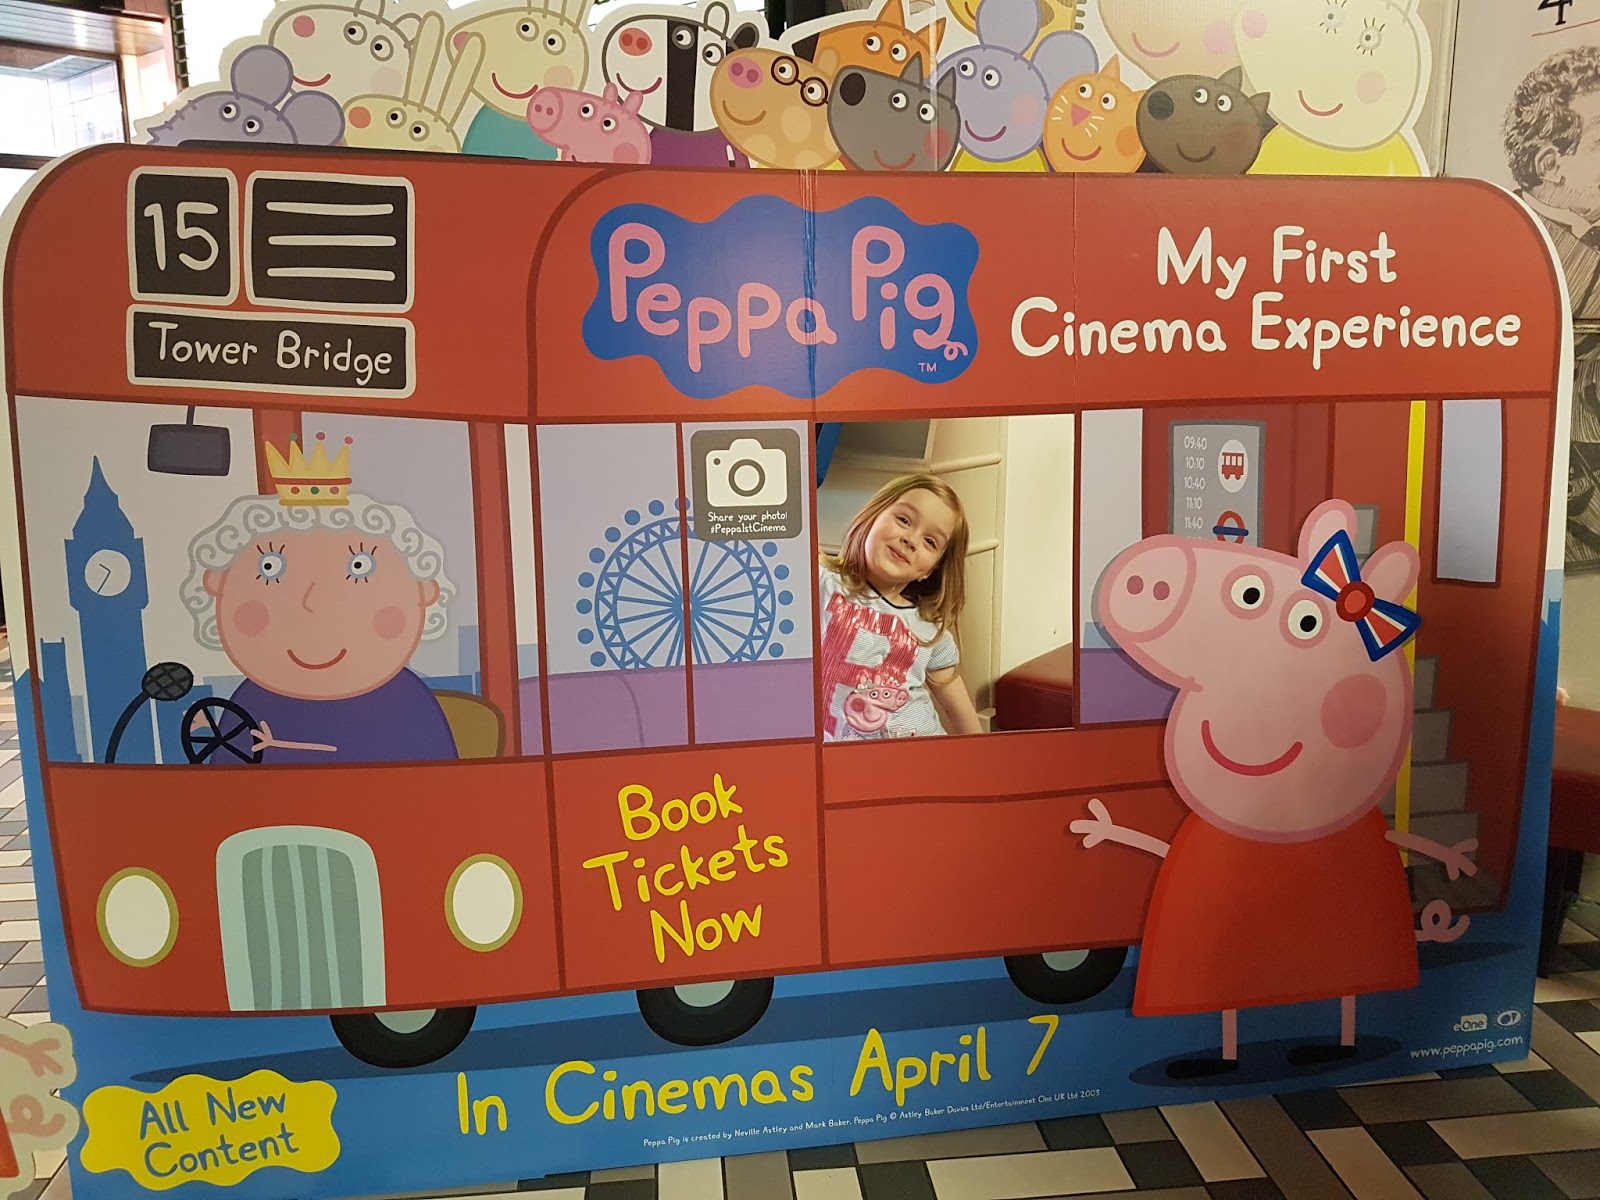 Peppa Pig: My First Cinema Experience review